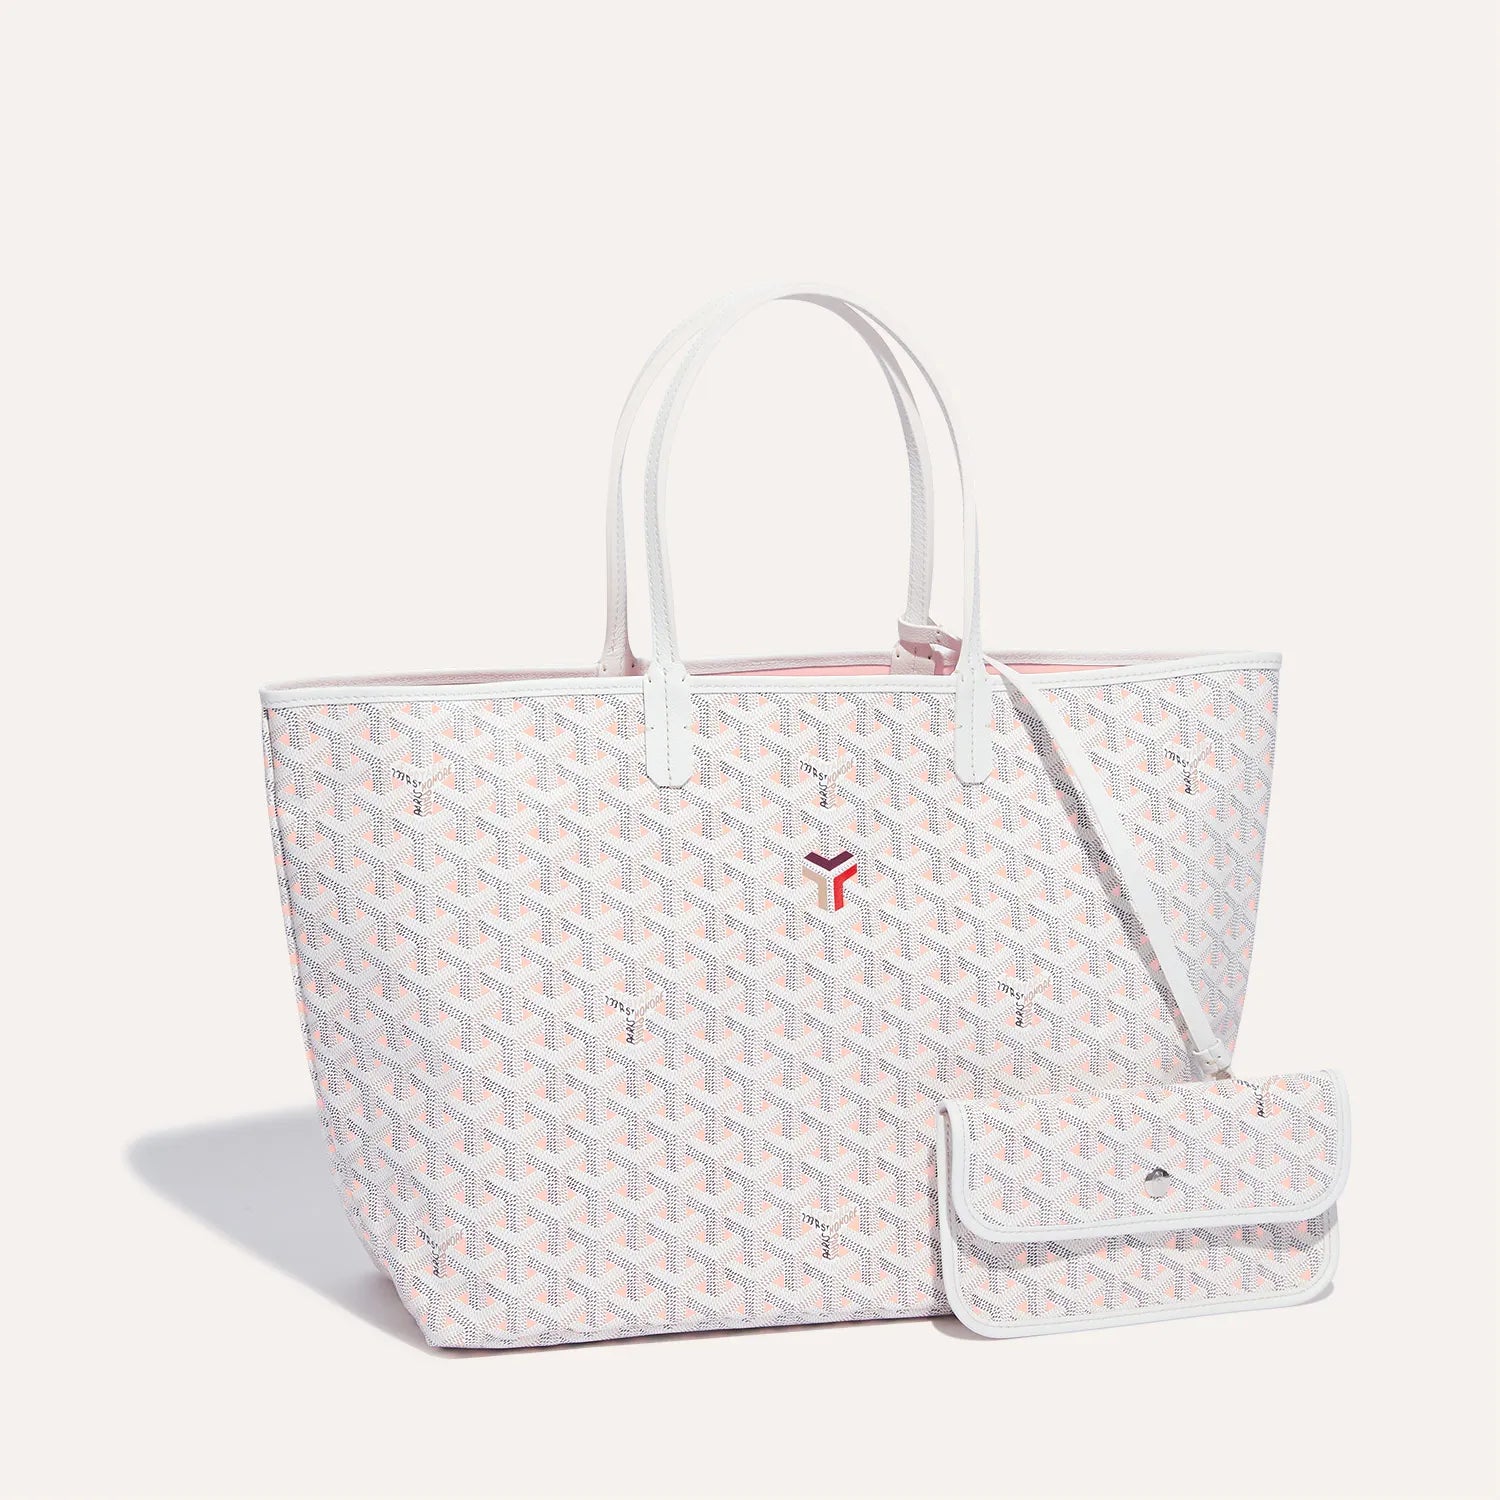 Goyard Women's Limited Edition Pink St. Louis PM Claire Tote